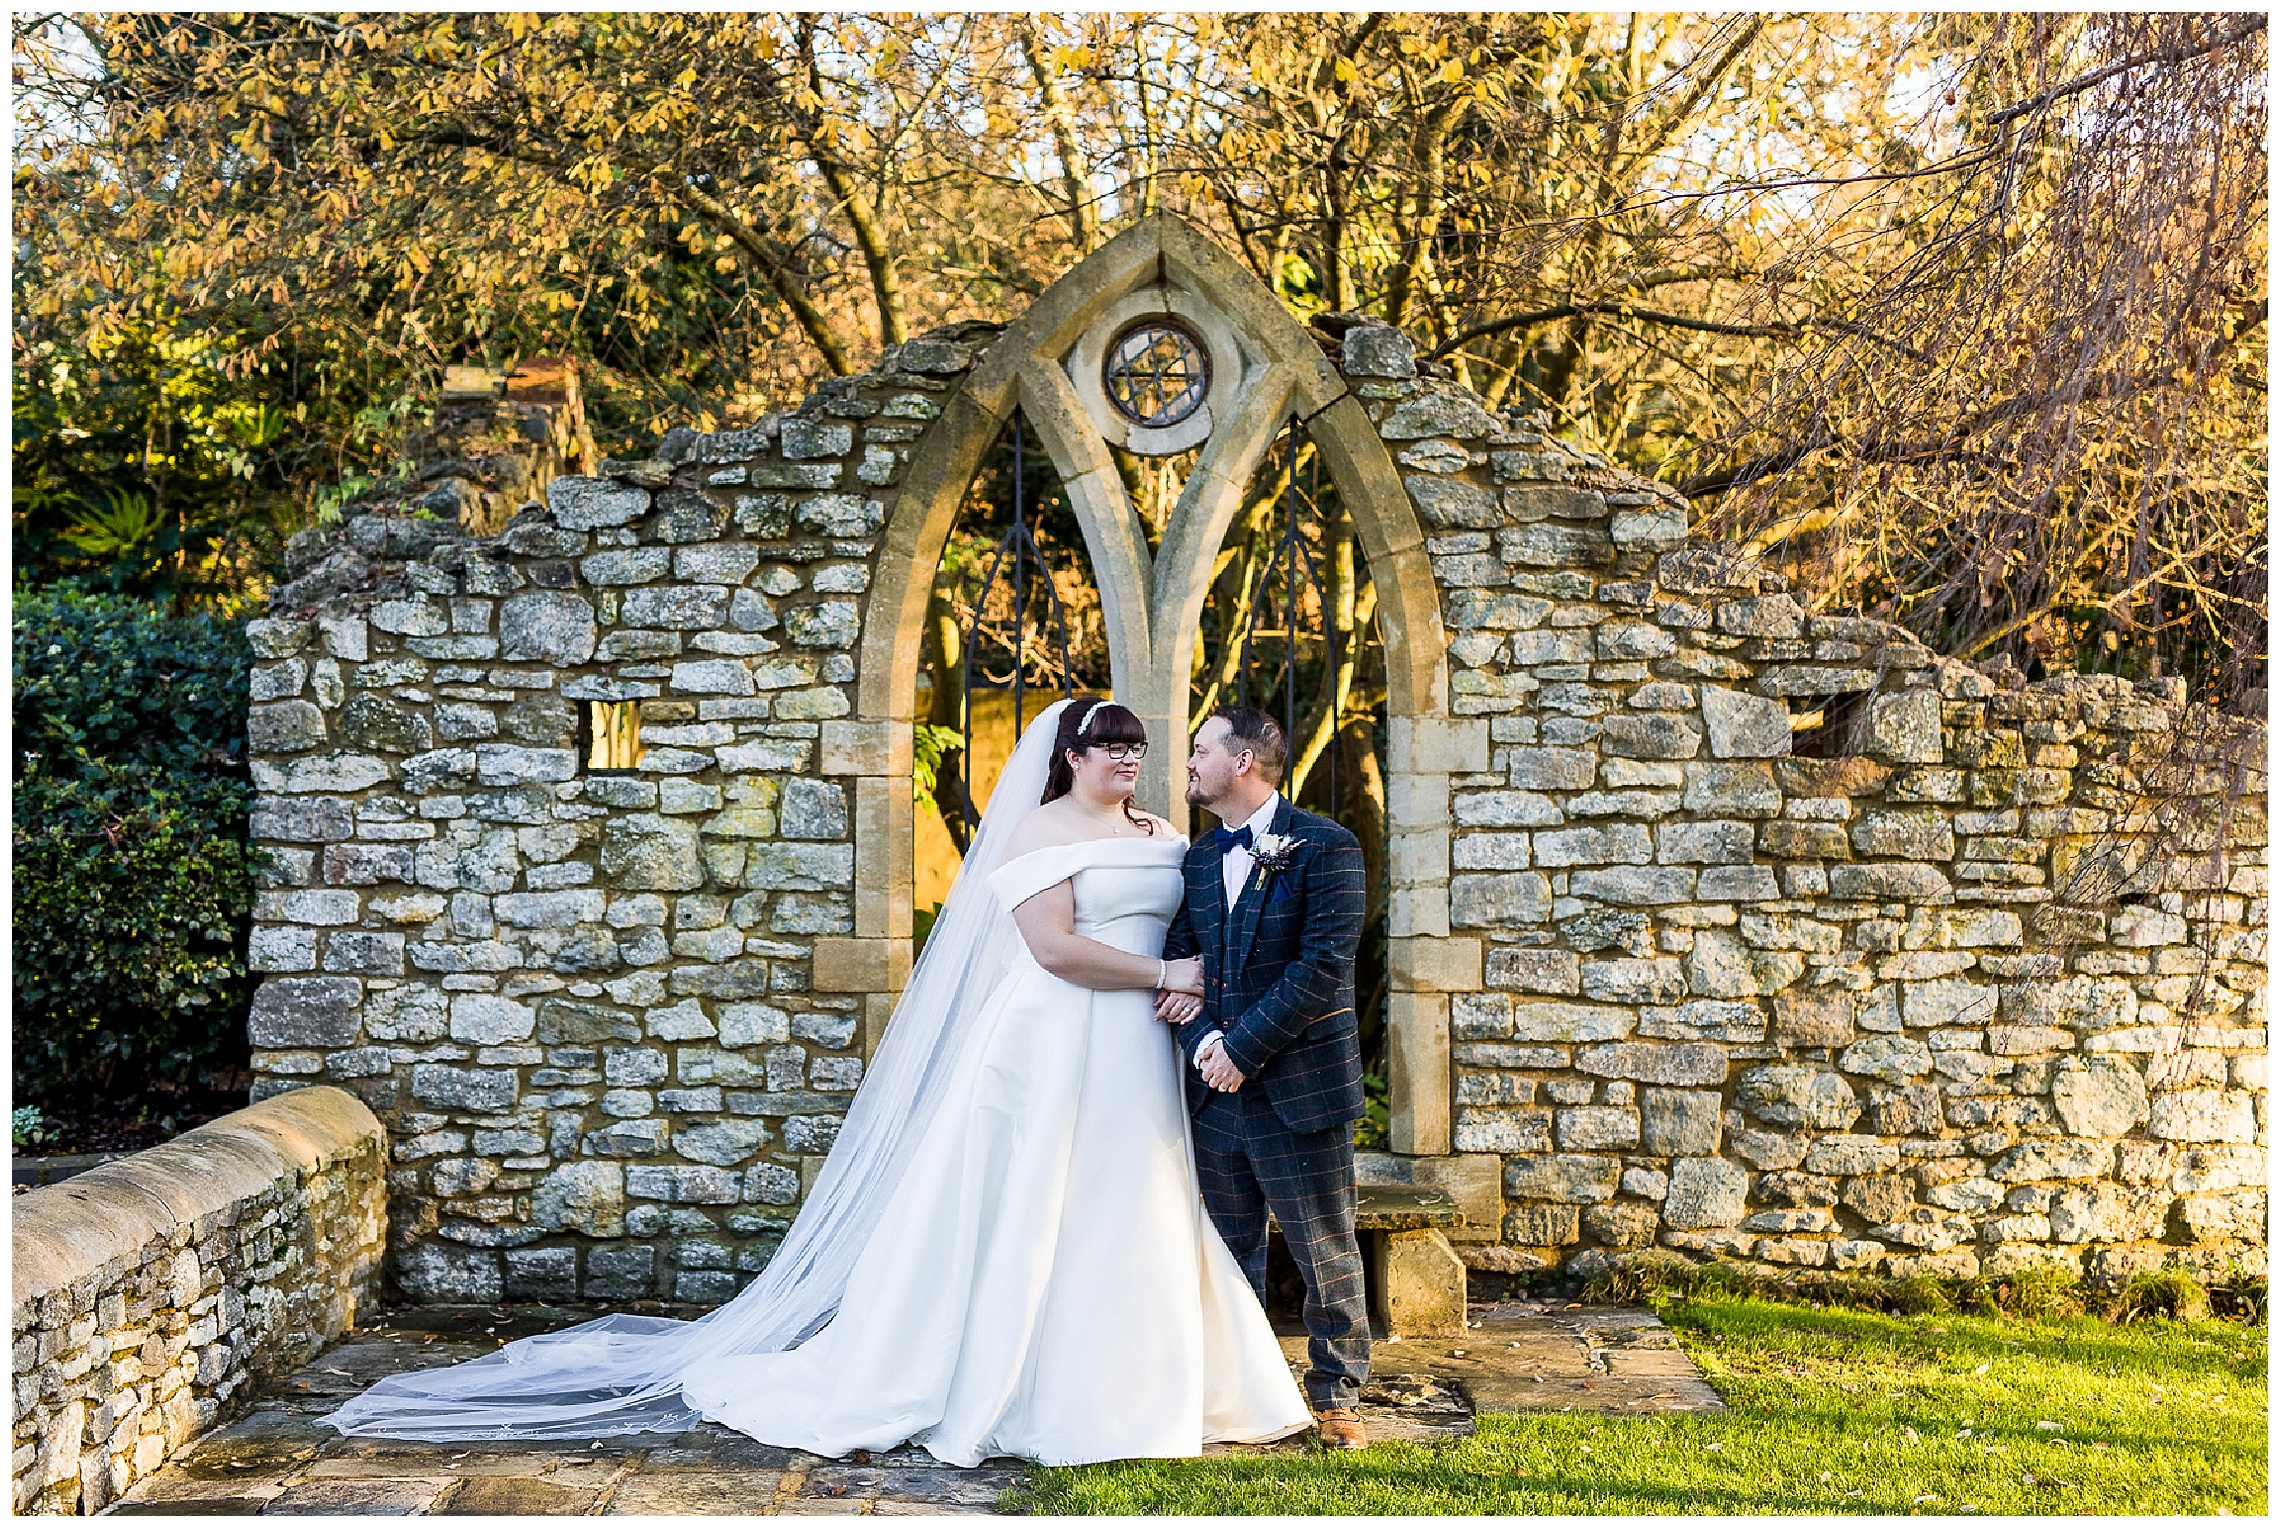 tythe barn in launton outside wall with bride and groom